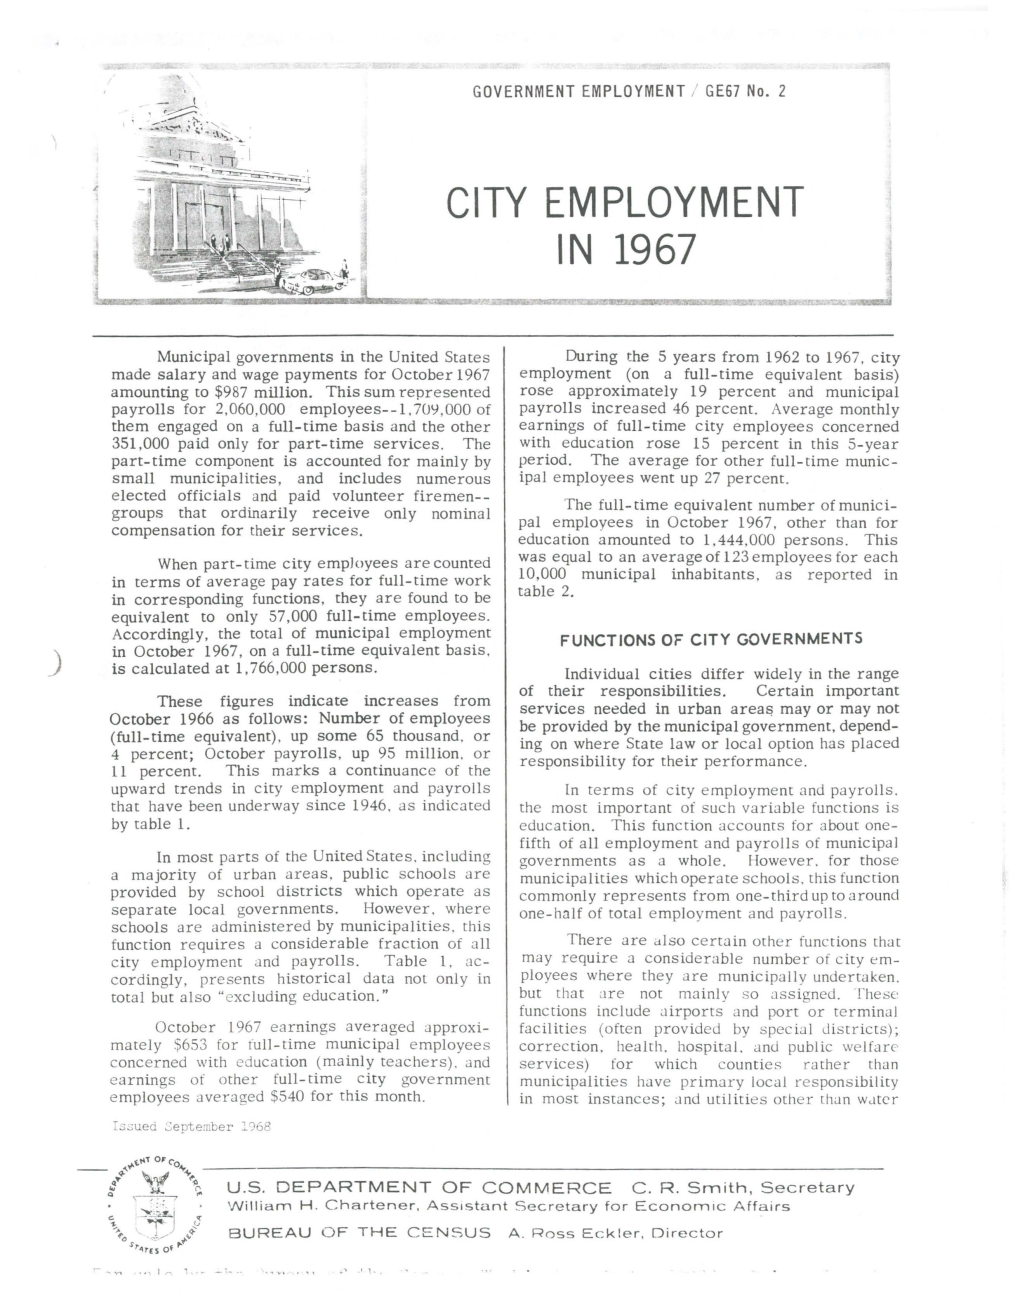 City Employment in 1967